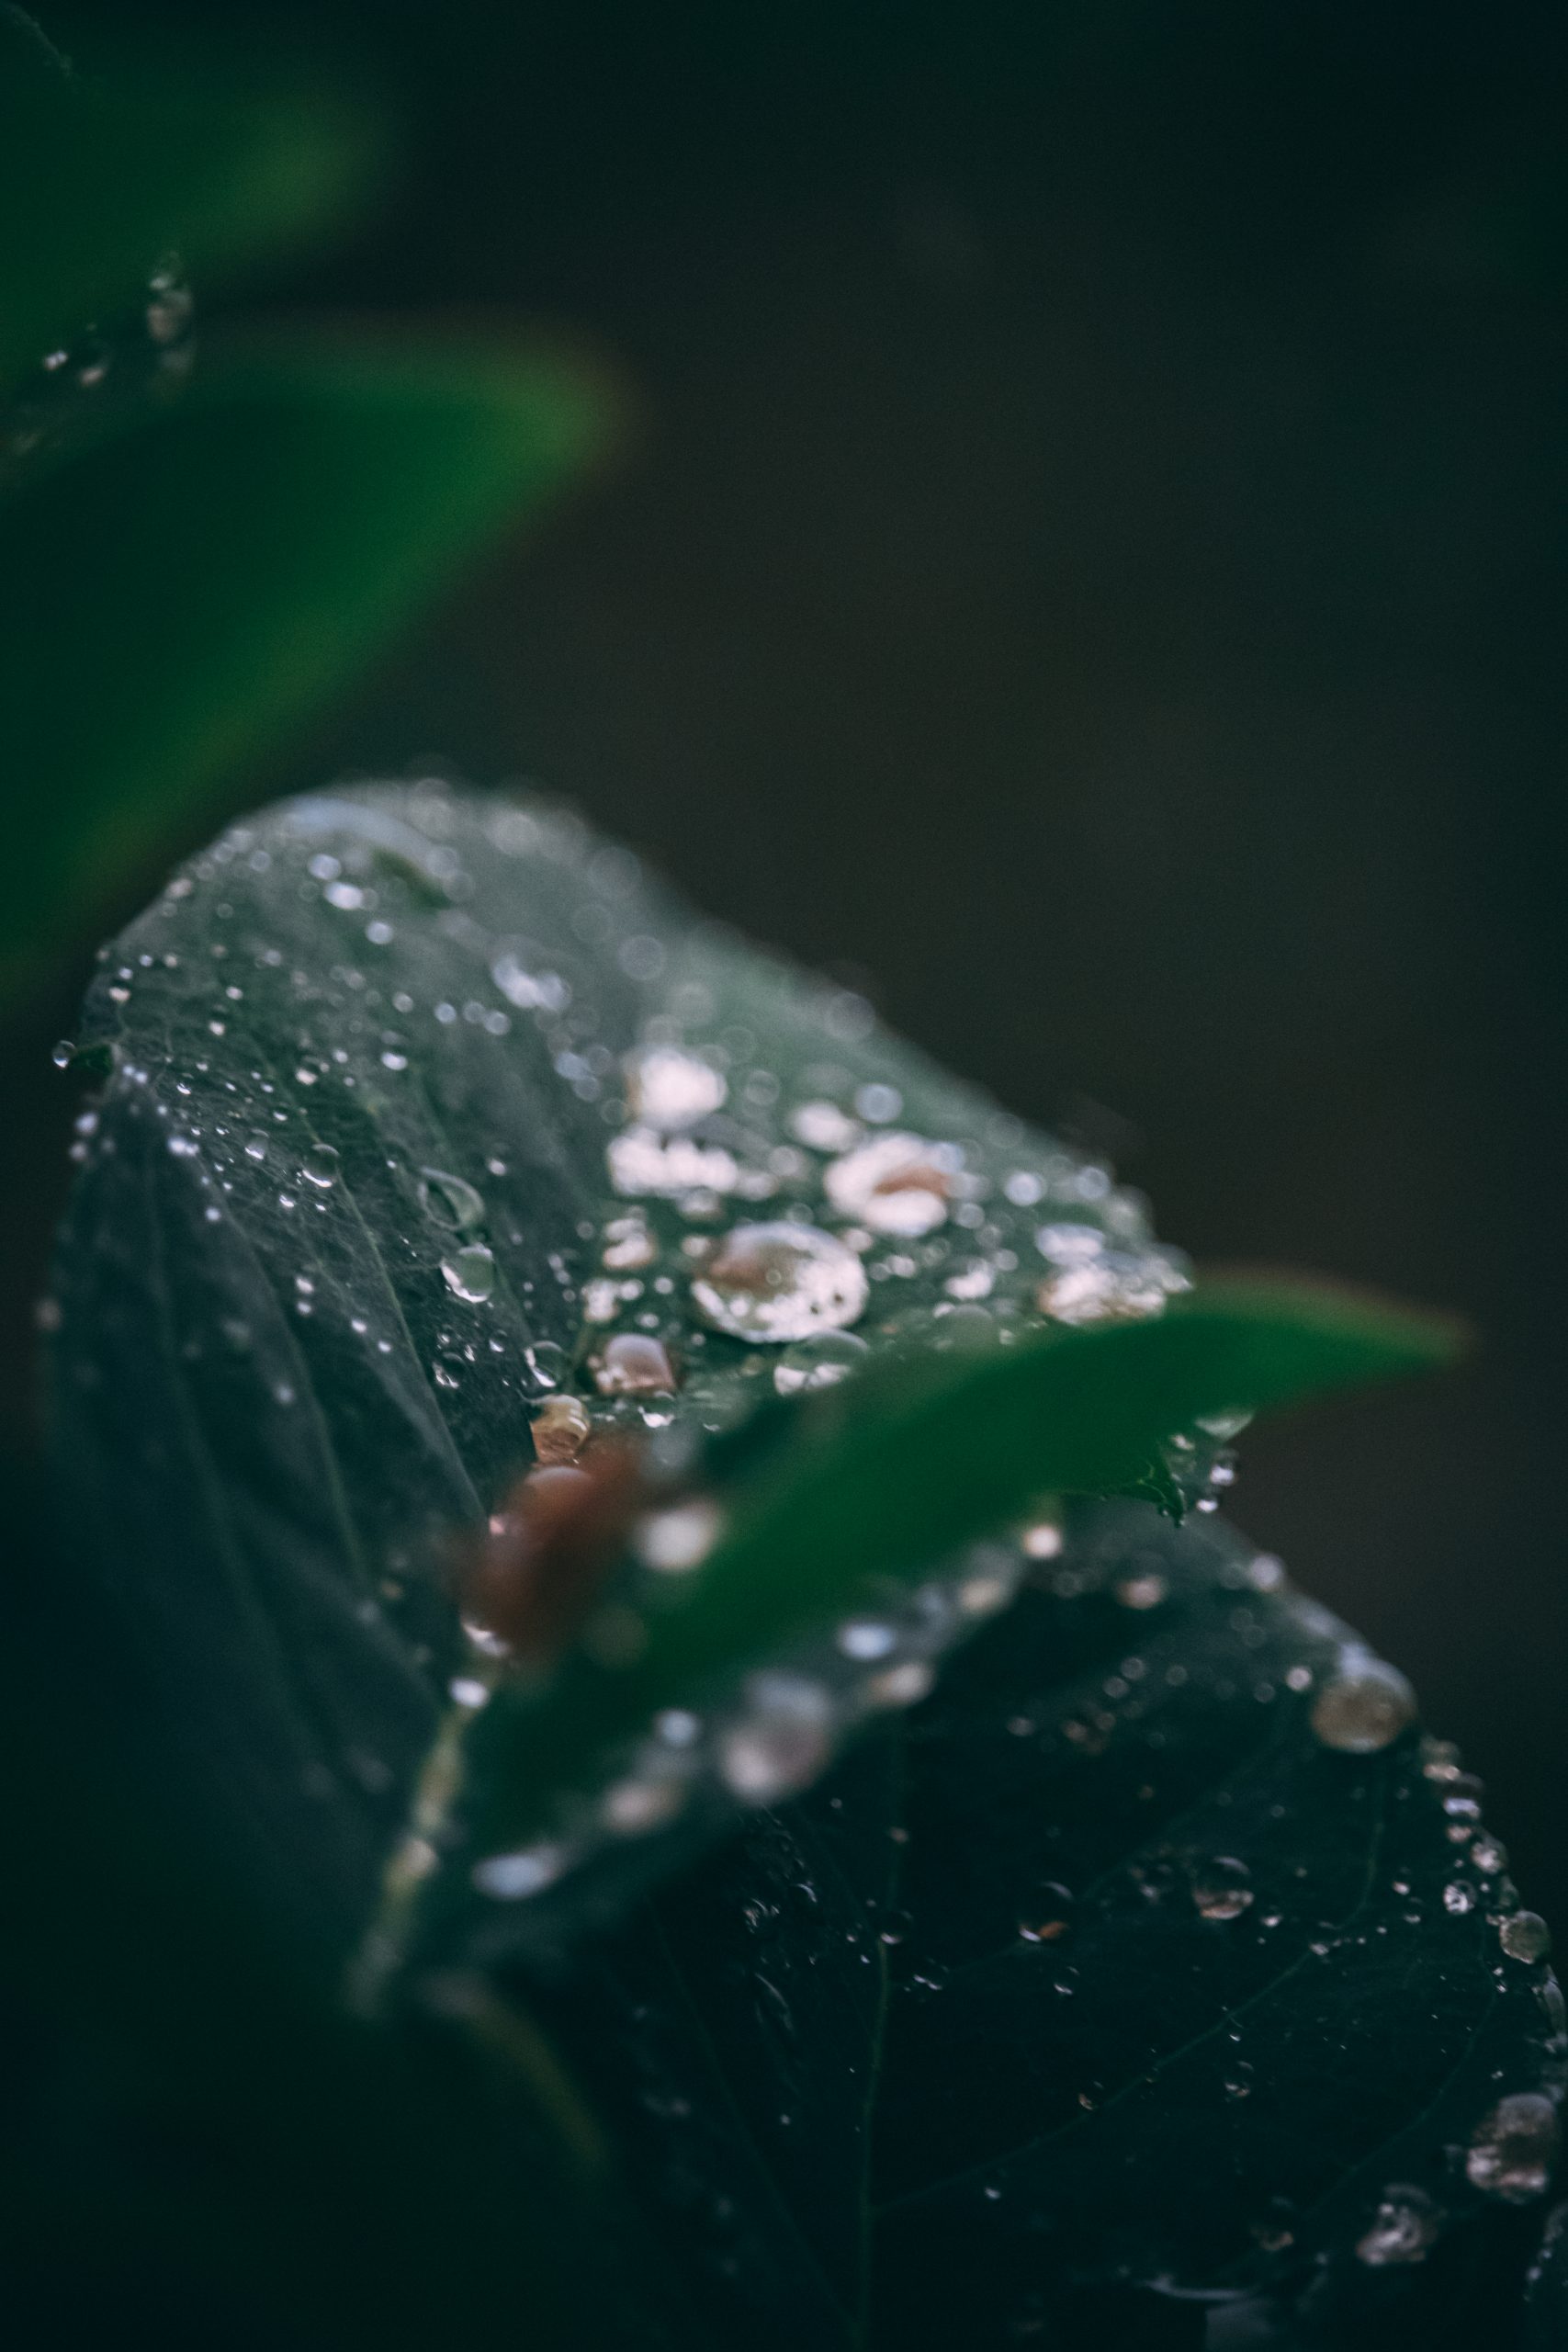 Water particles on leaf